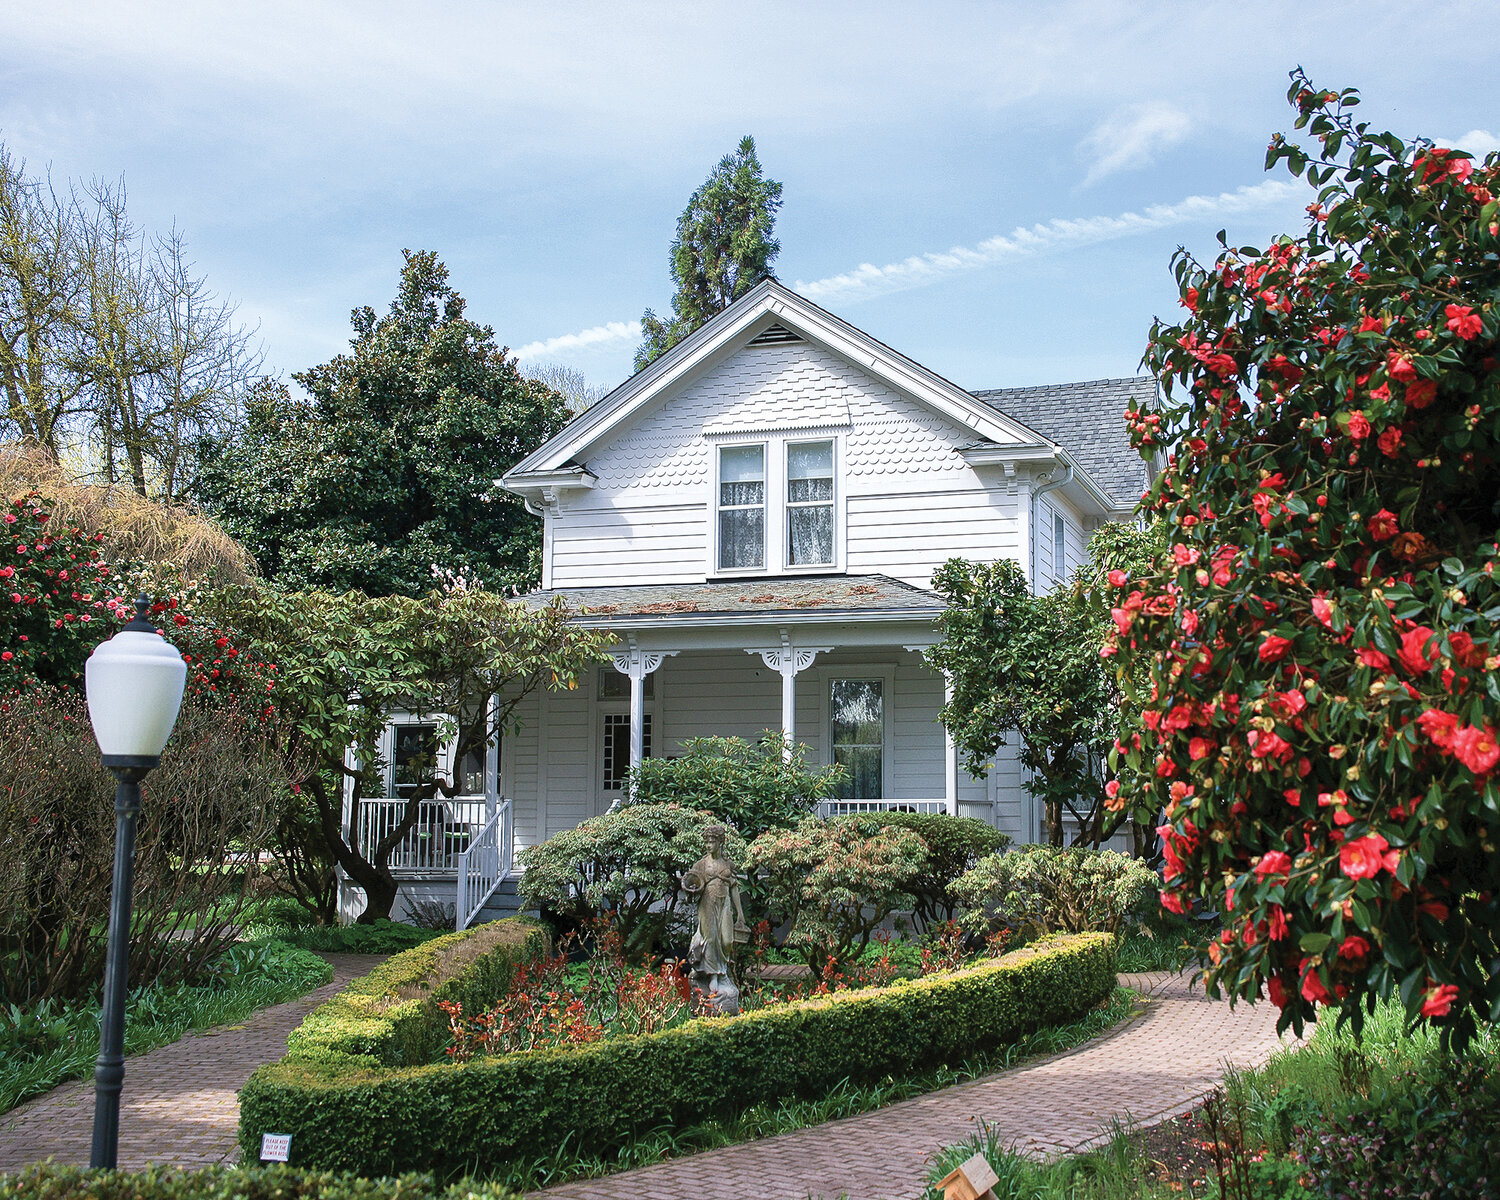 The 1889 Victorian farmhouse at the Hulda Klager Lilac Gardens is pictured on Tuesday, April 25.